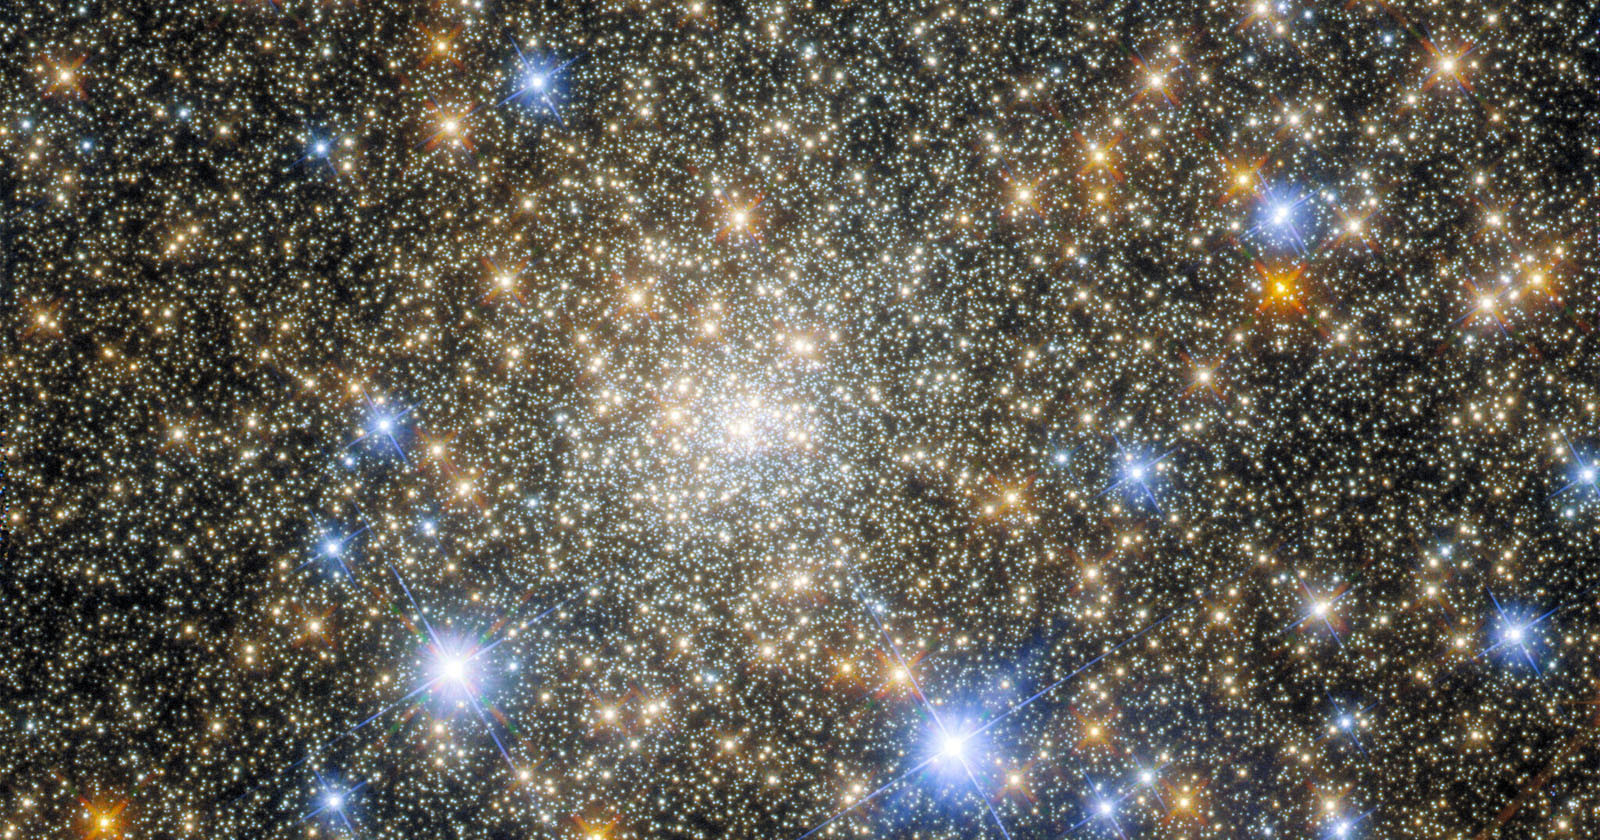 Hubble Photographs a Gorgeous Glittering Star Cluster